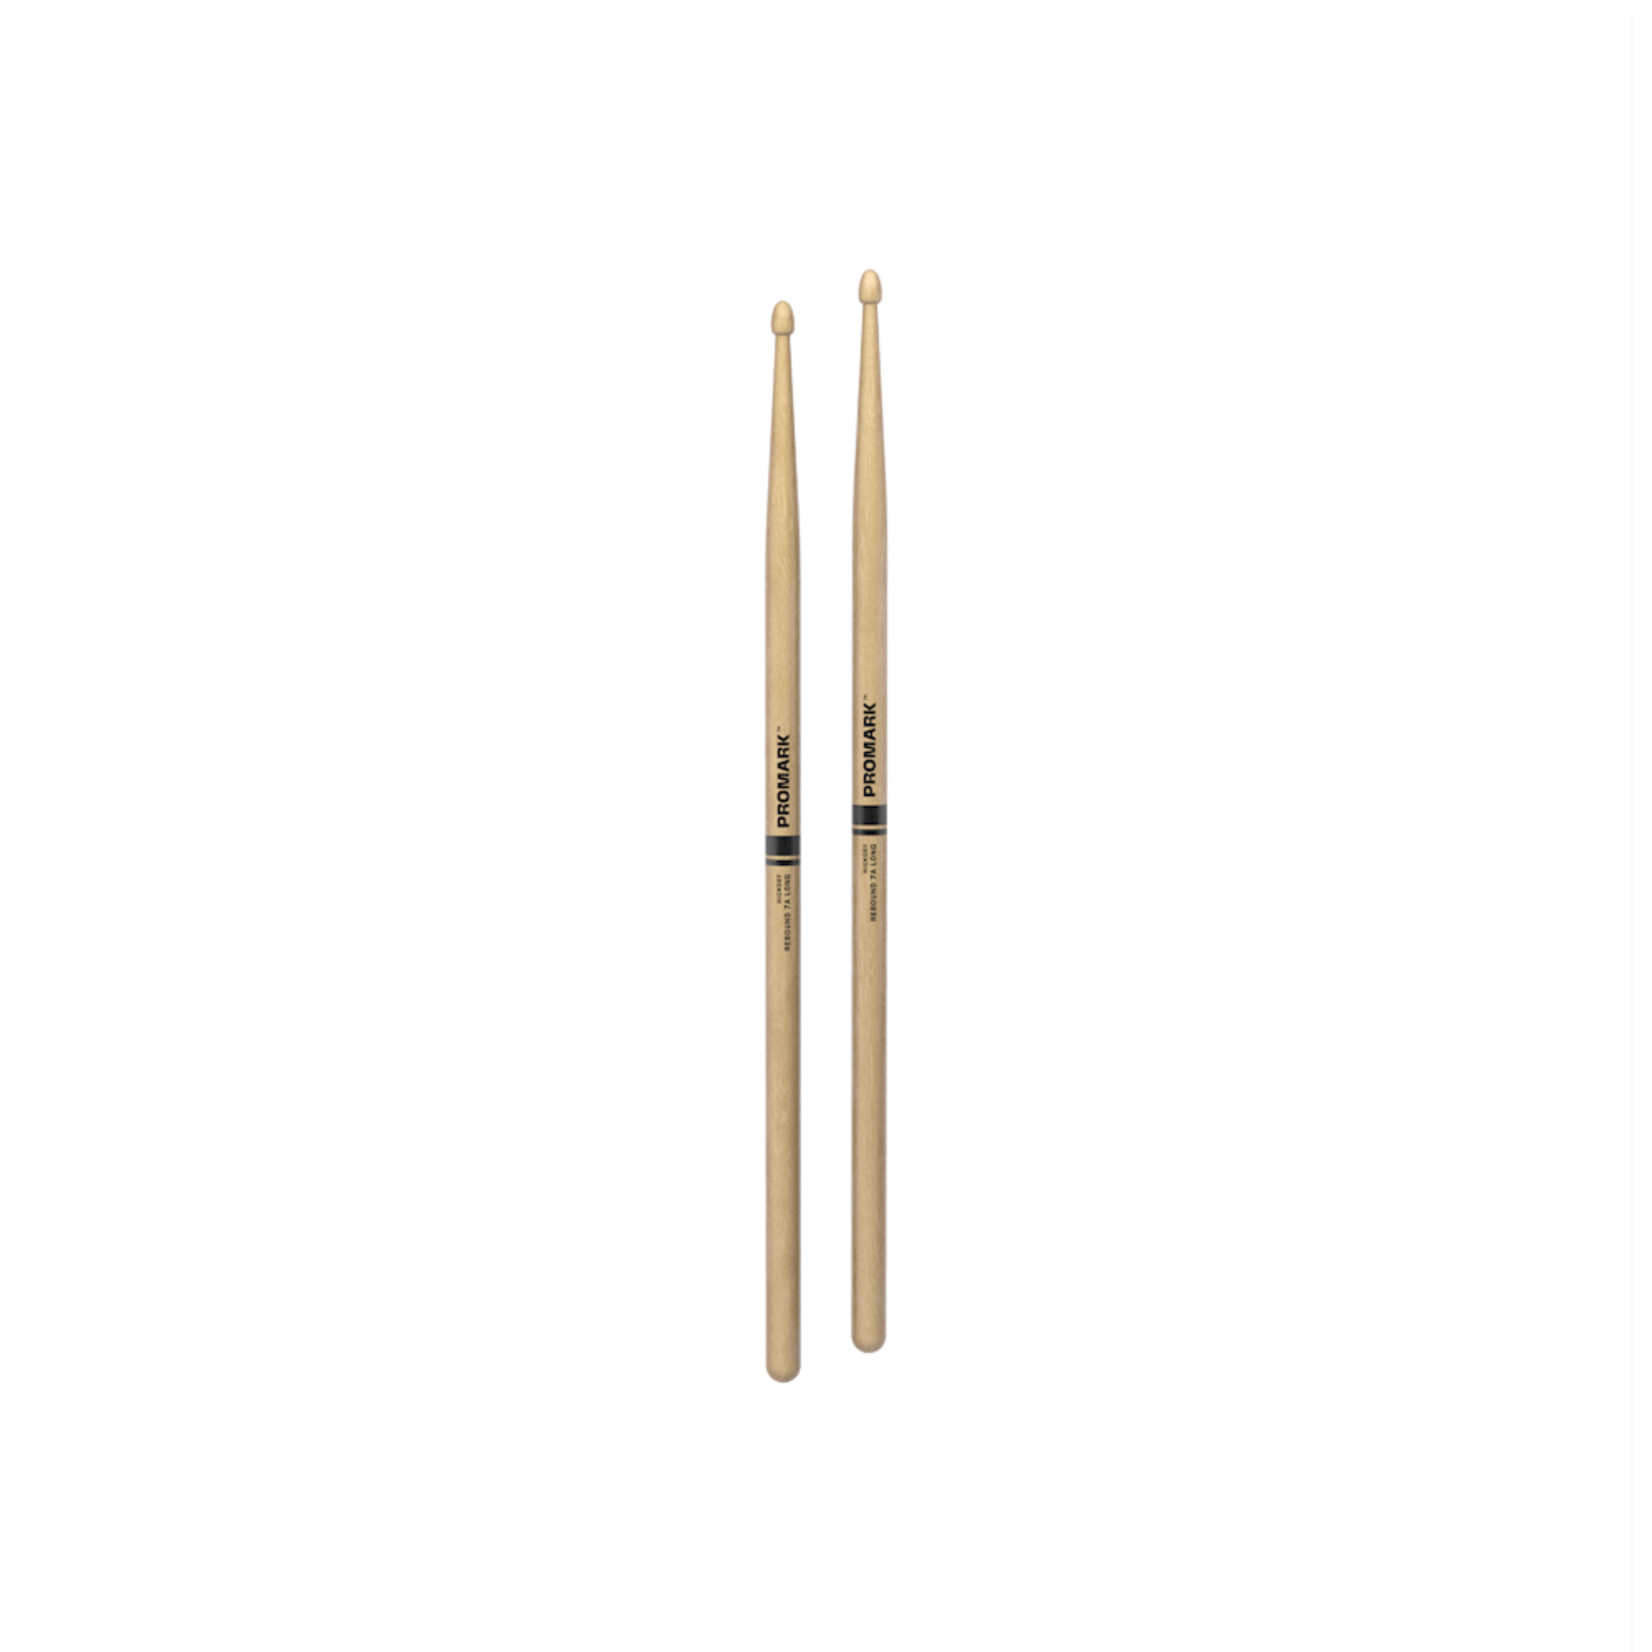 Promark Promark Hickory Rebound 7A Long Drumsticks RBH535LAW